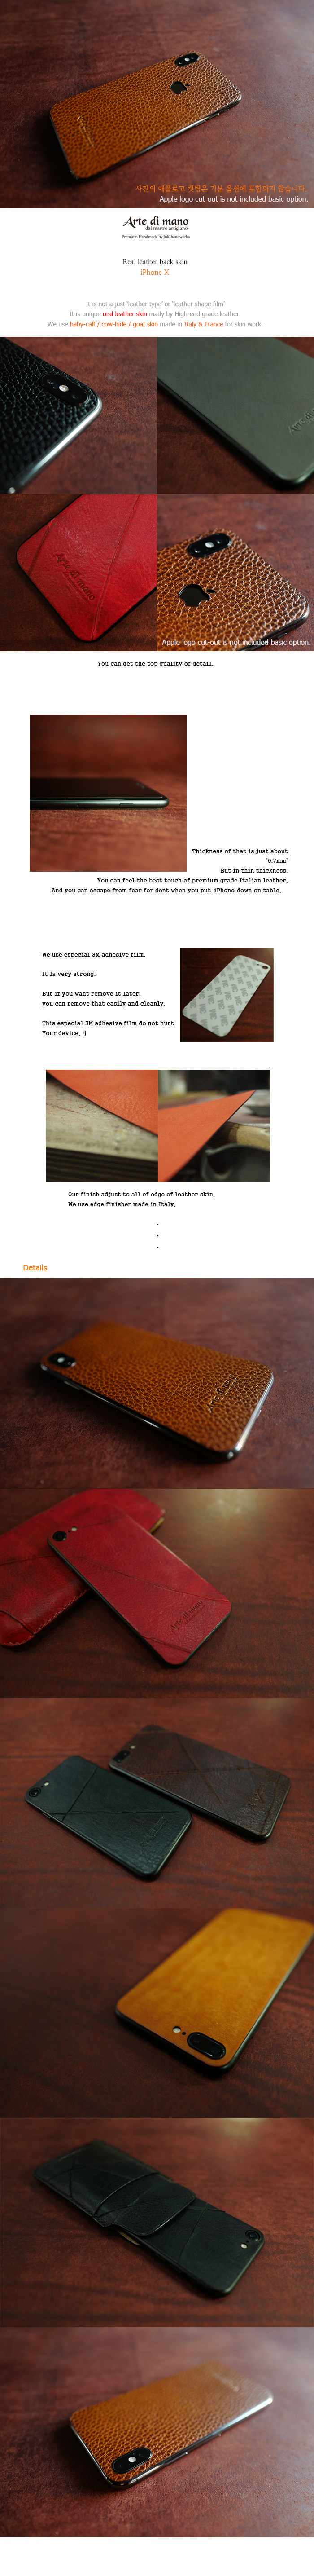 Skinning My Phone Case With Leather - Leather Craft 